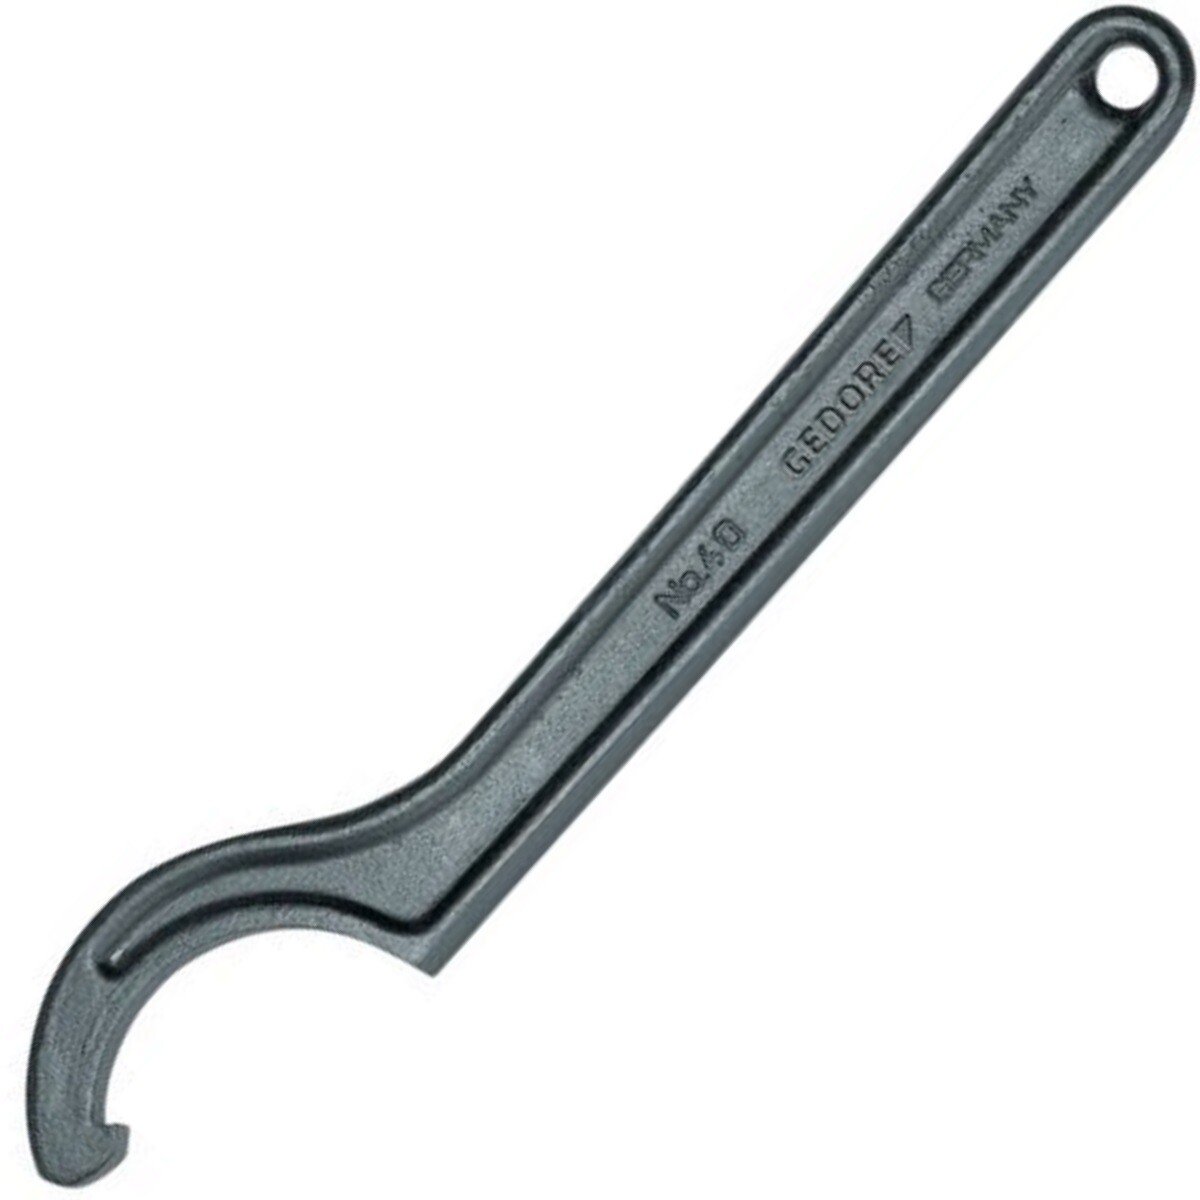 Gedore 6334880 68-75mm Hook Spanner with Lug 40 68-75